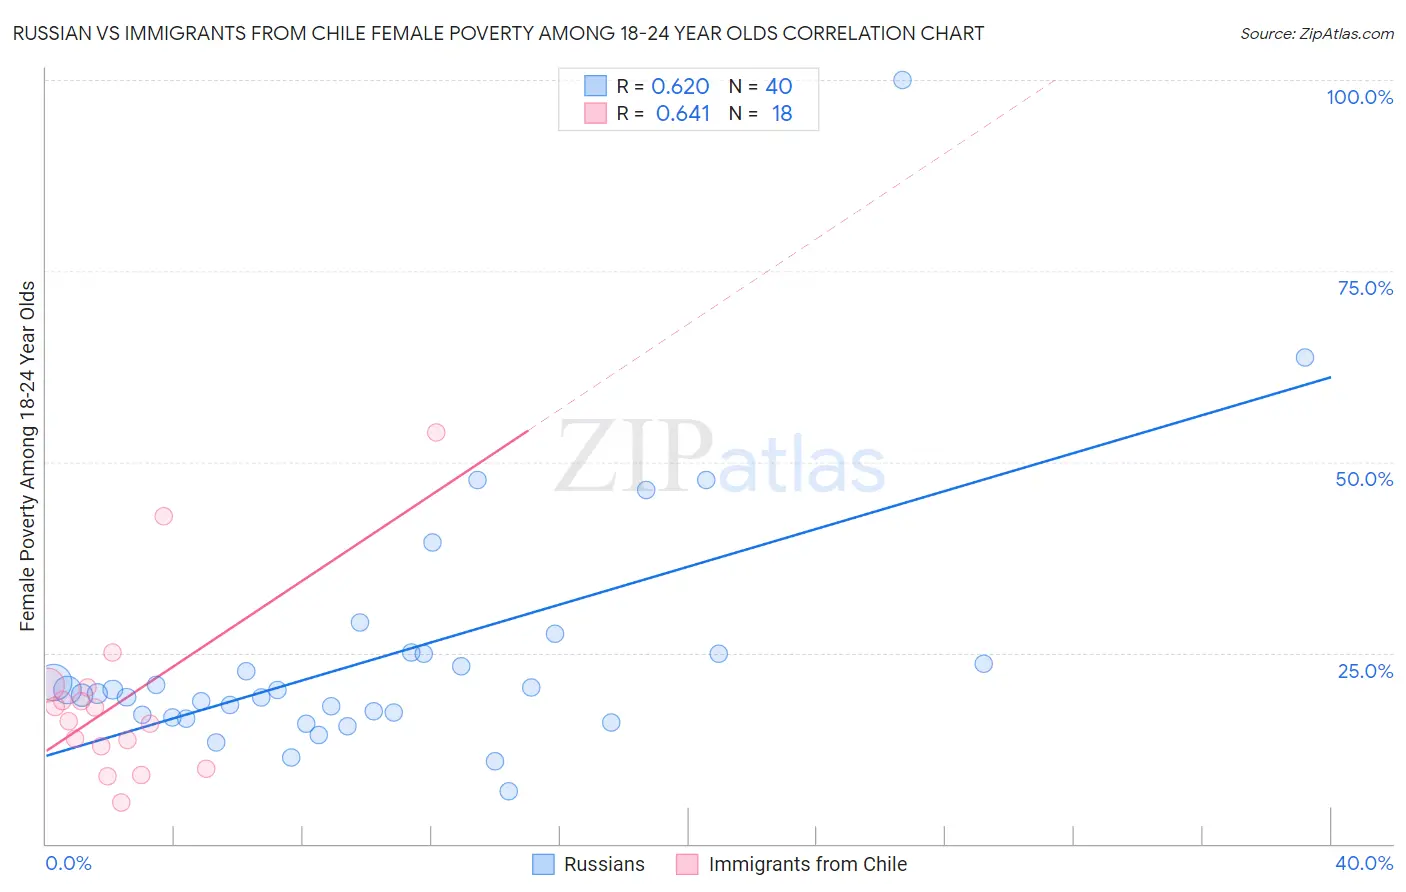 Russian vs Immigrants from Chile Female Poverty Among 18-24 Year Olds